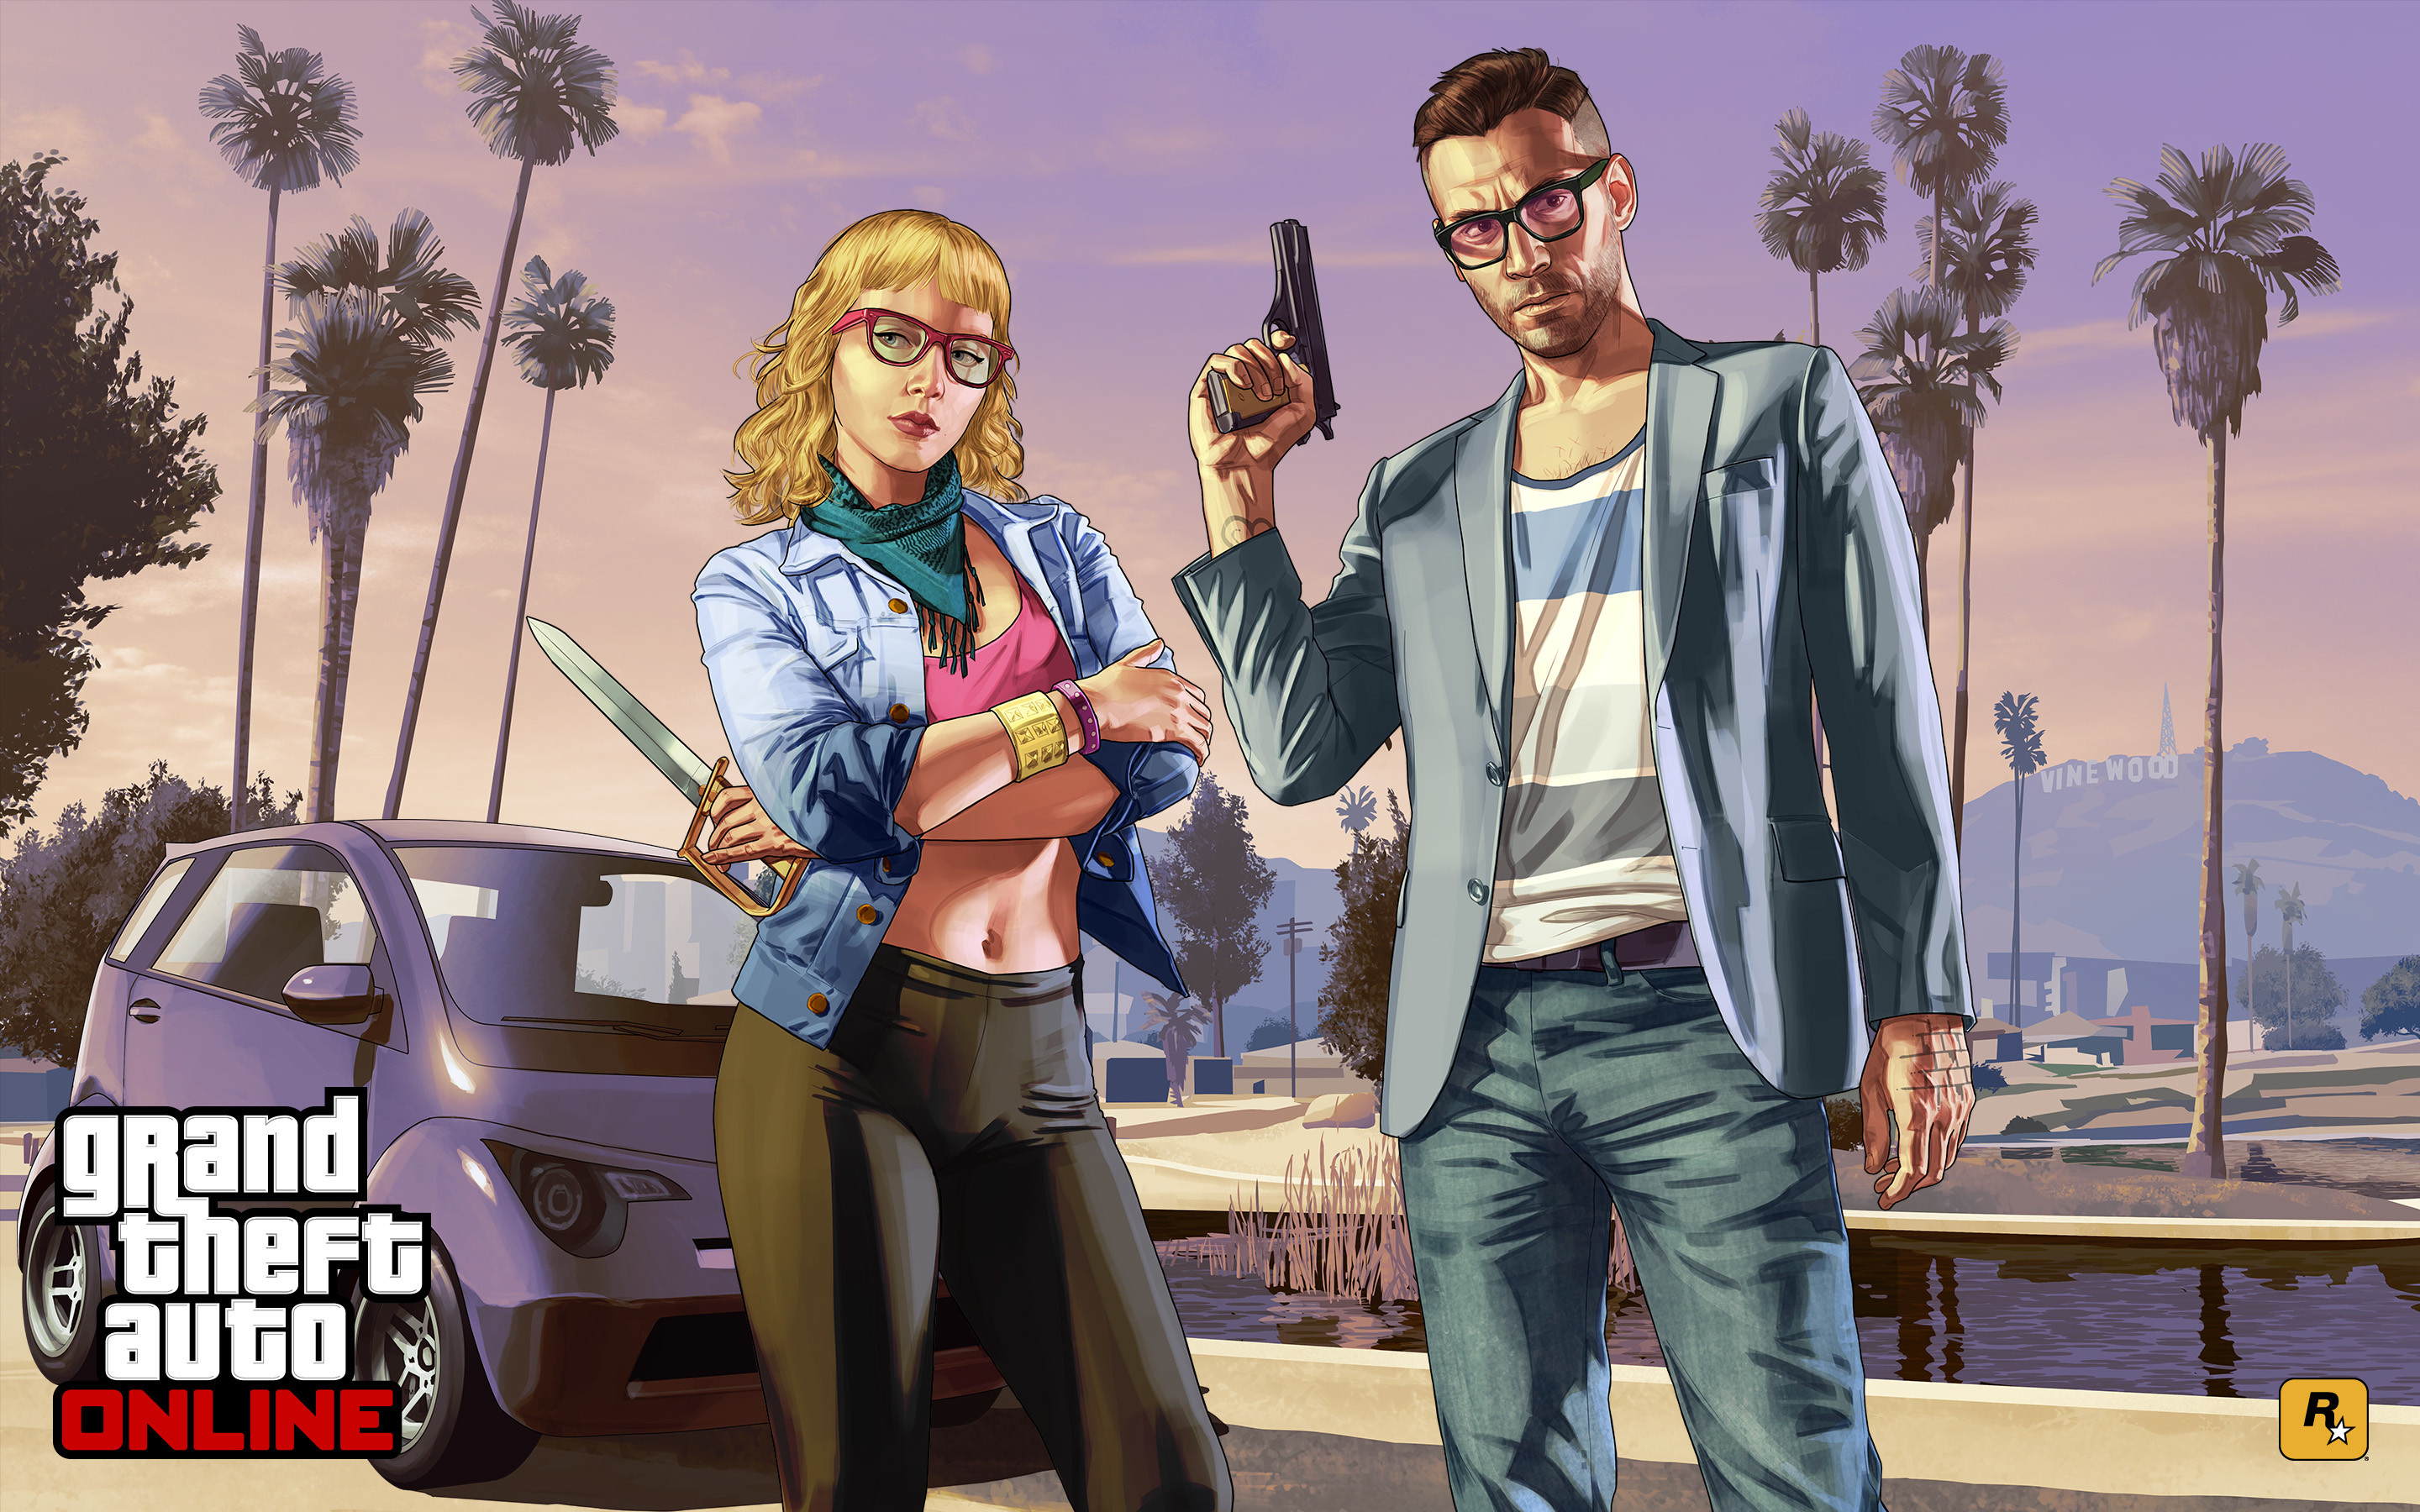 2880x1800 Cool Gta 5 Online Wallpaper Images Gallery